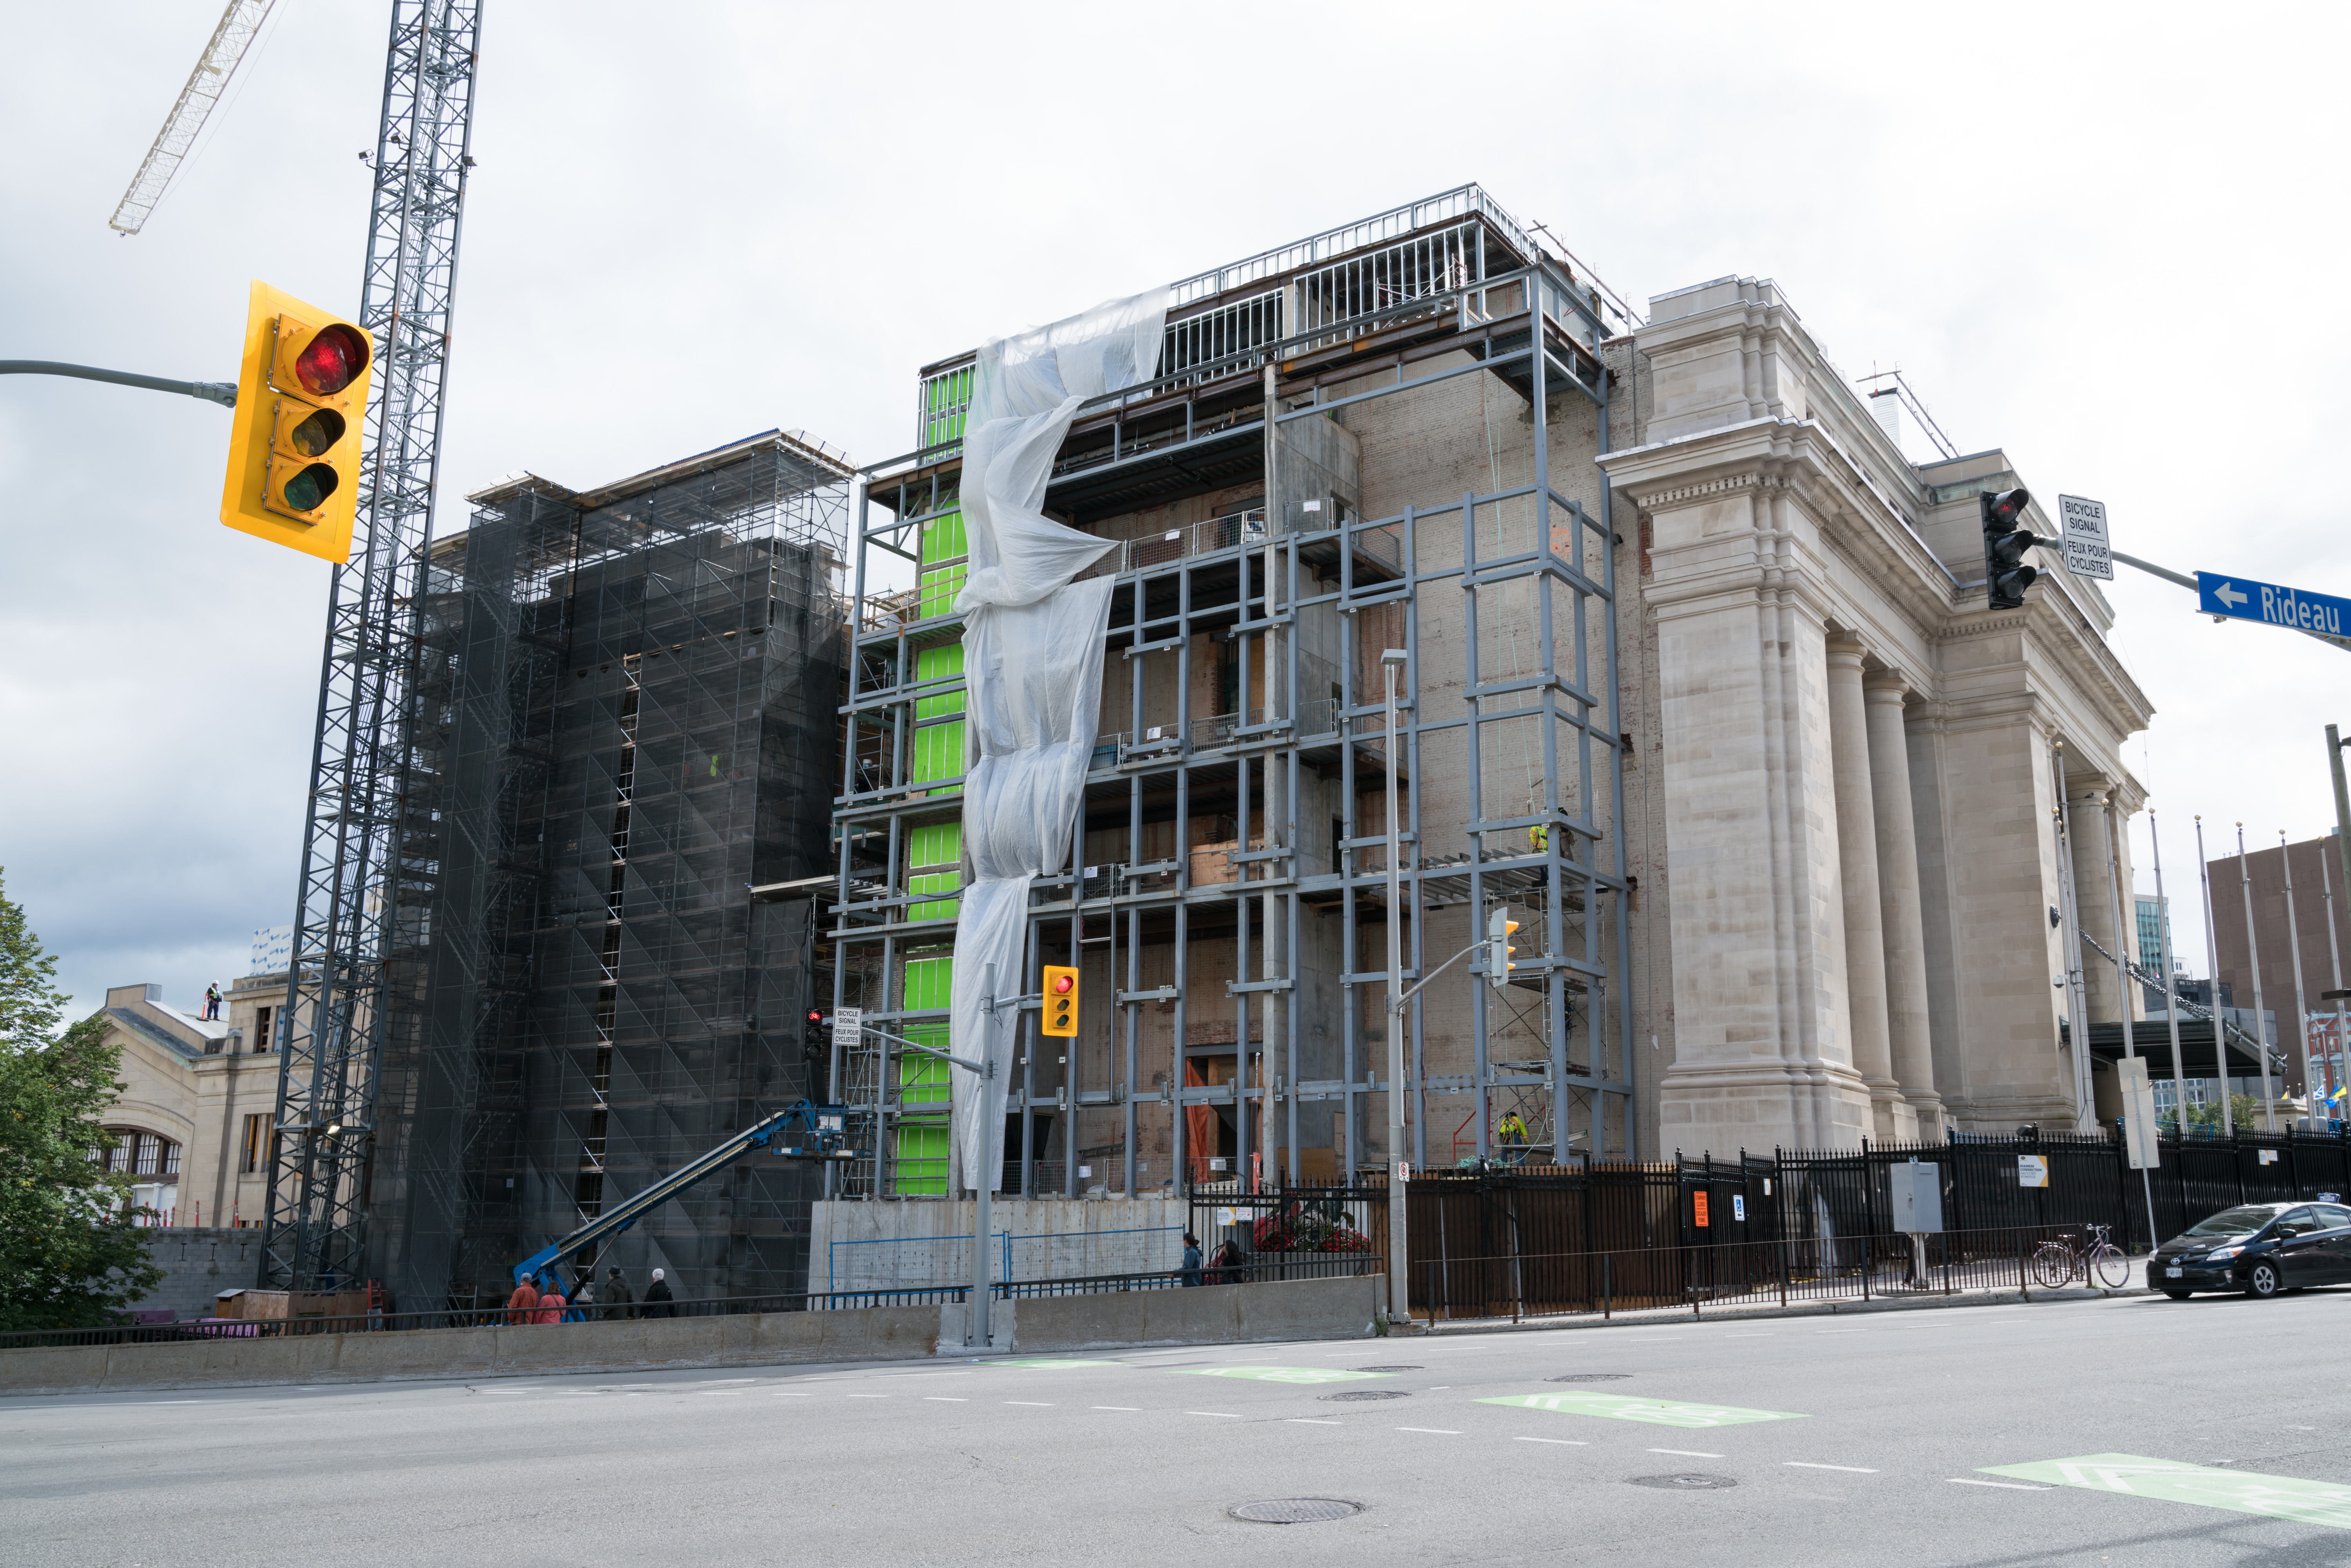 2017 - The same exterior view of the building. There is scaffolding and the new east addition is being built.